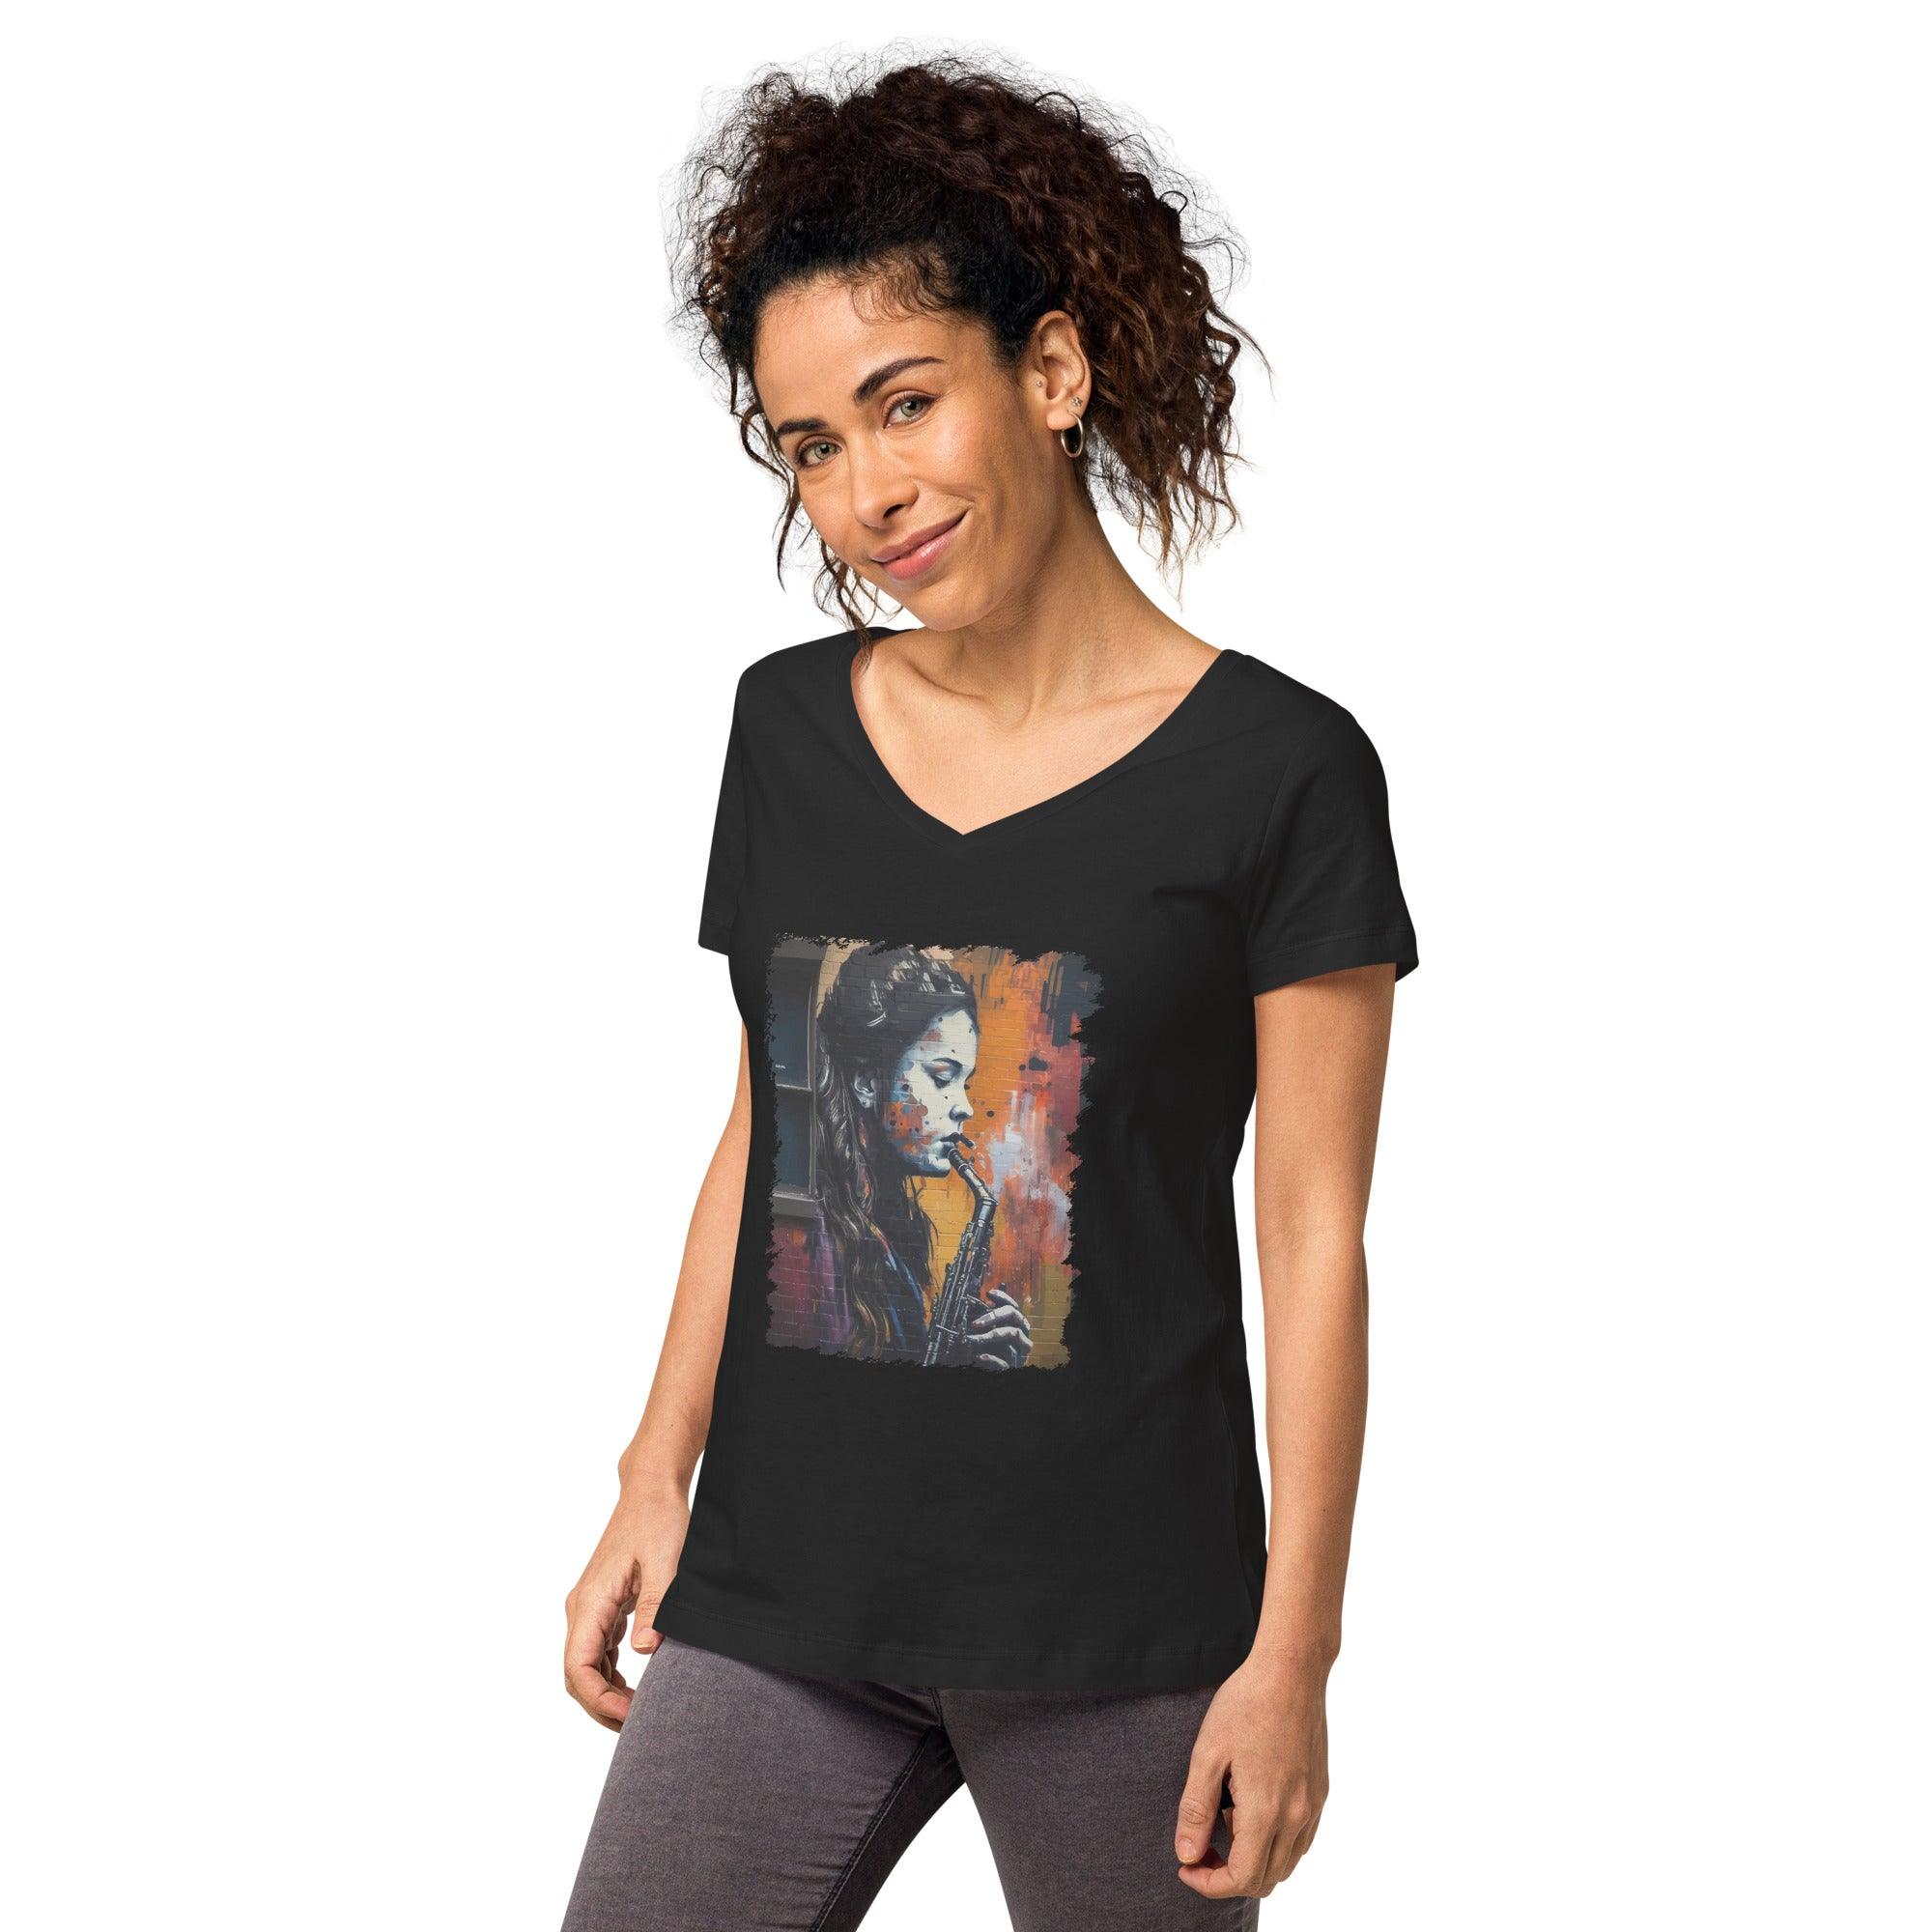 Notes Flow Like Honey Women’s Fitted V-neck T-shirt - Beyond T-shirts